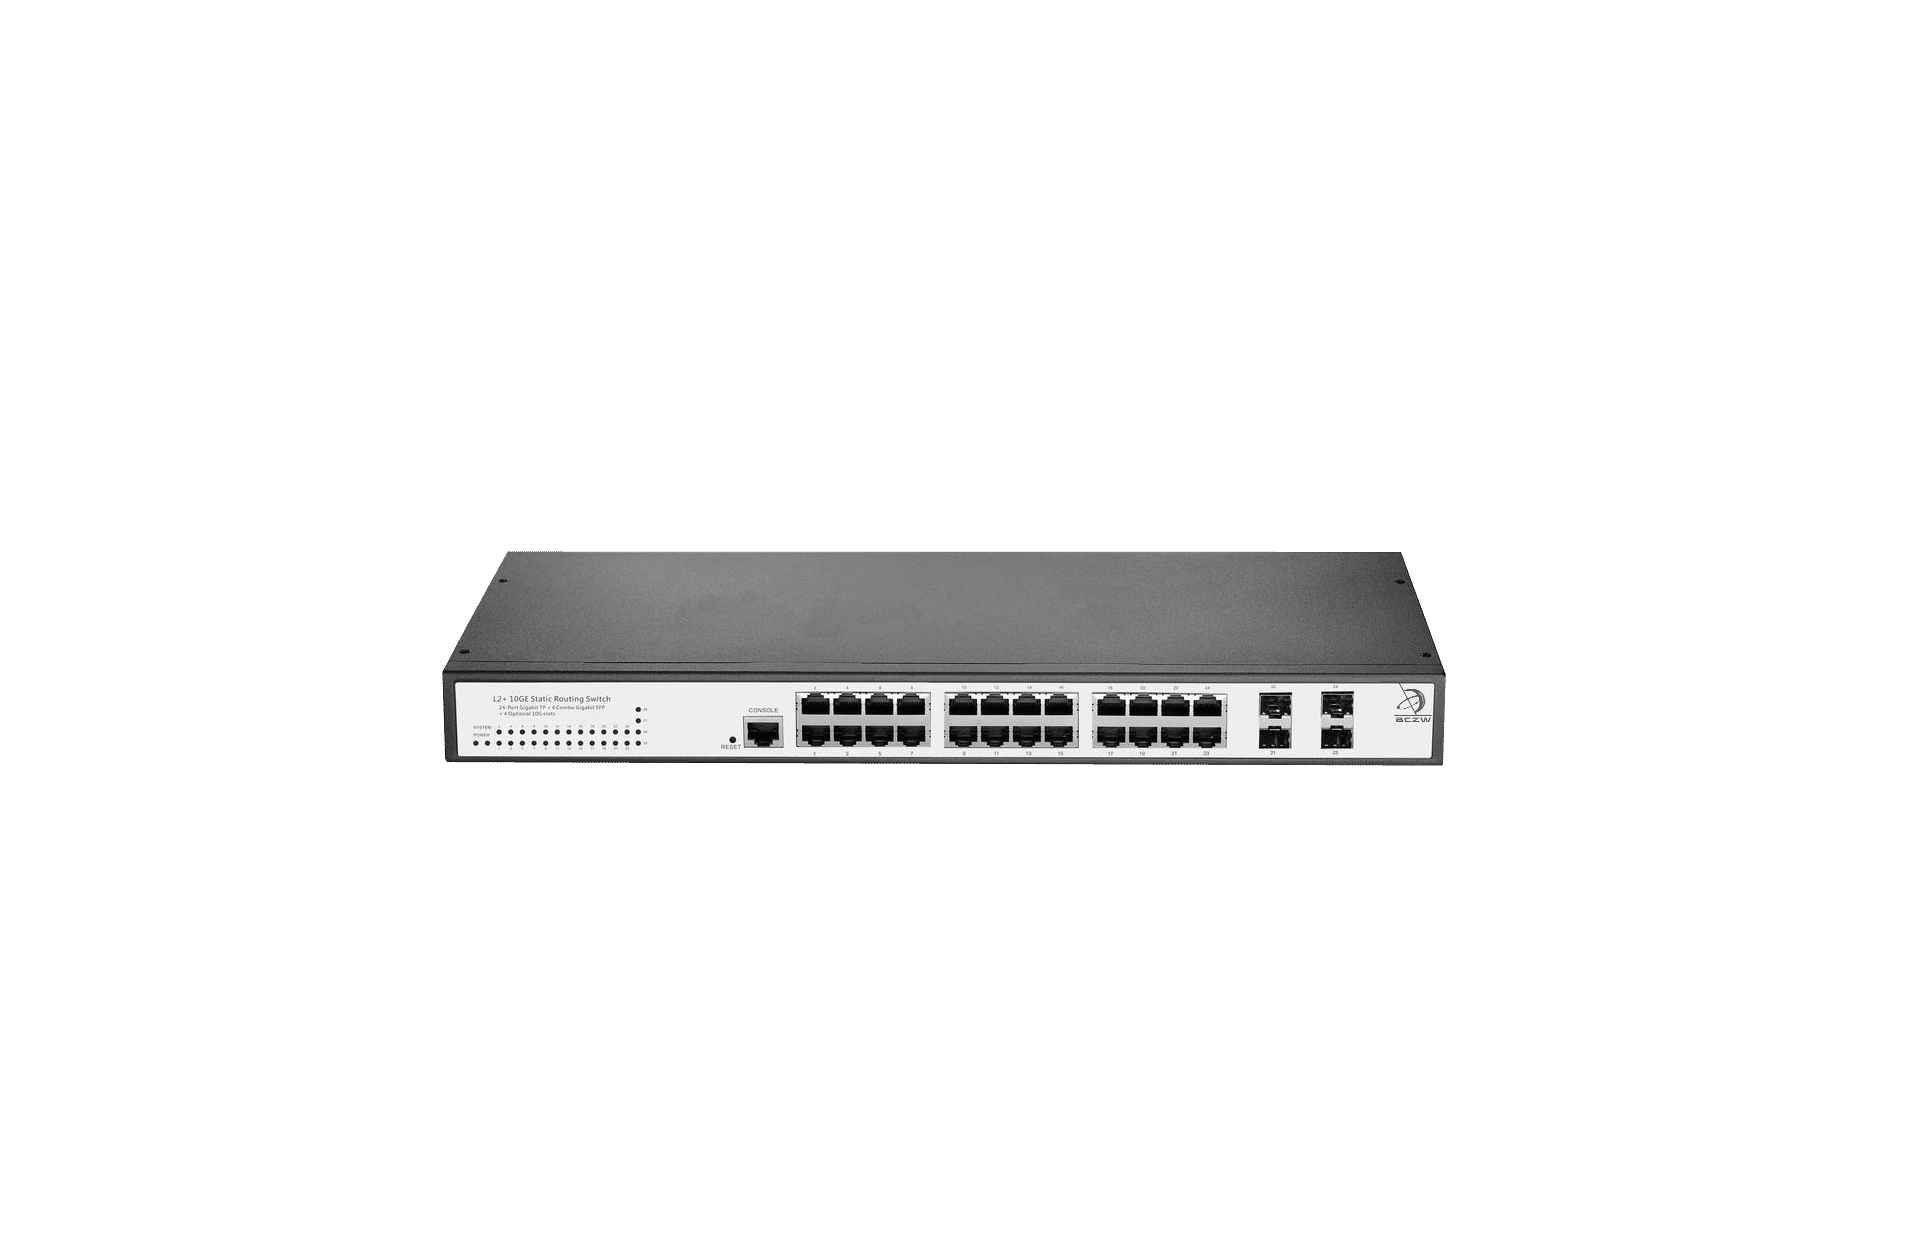 24-Port Layer 2+ 10GE Static Routing Switch with 4 Gigabit Combo 